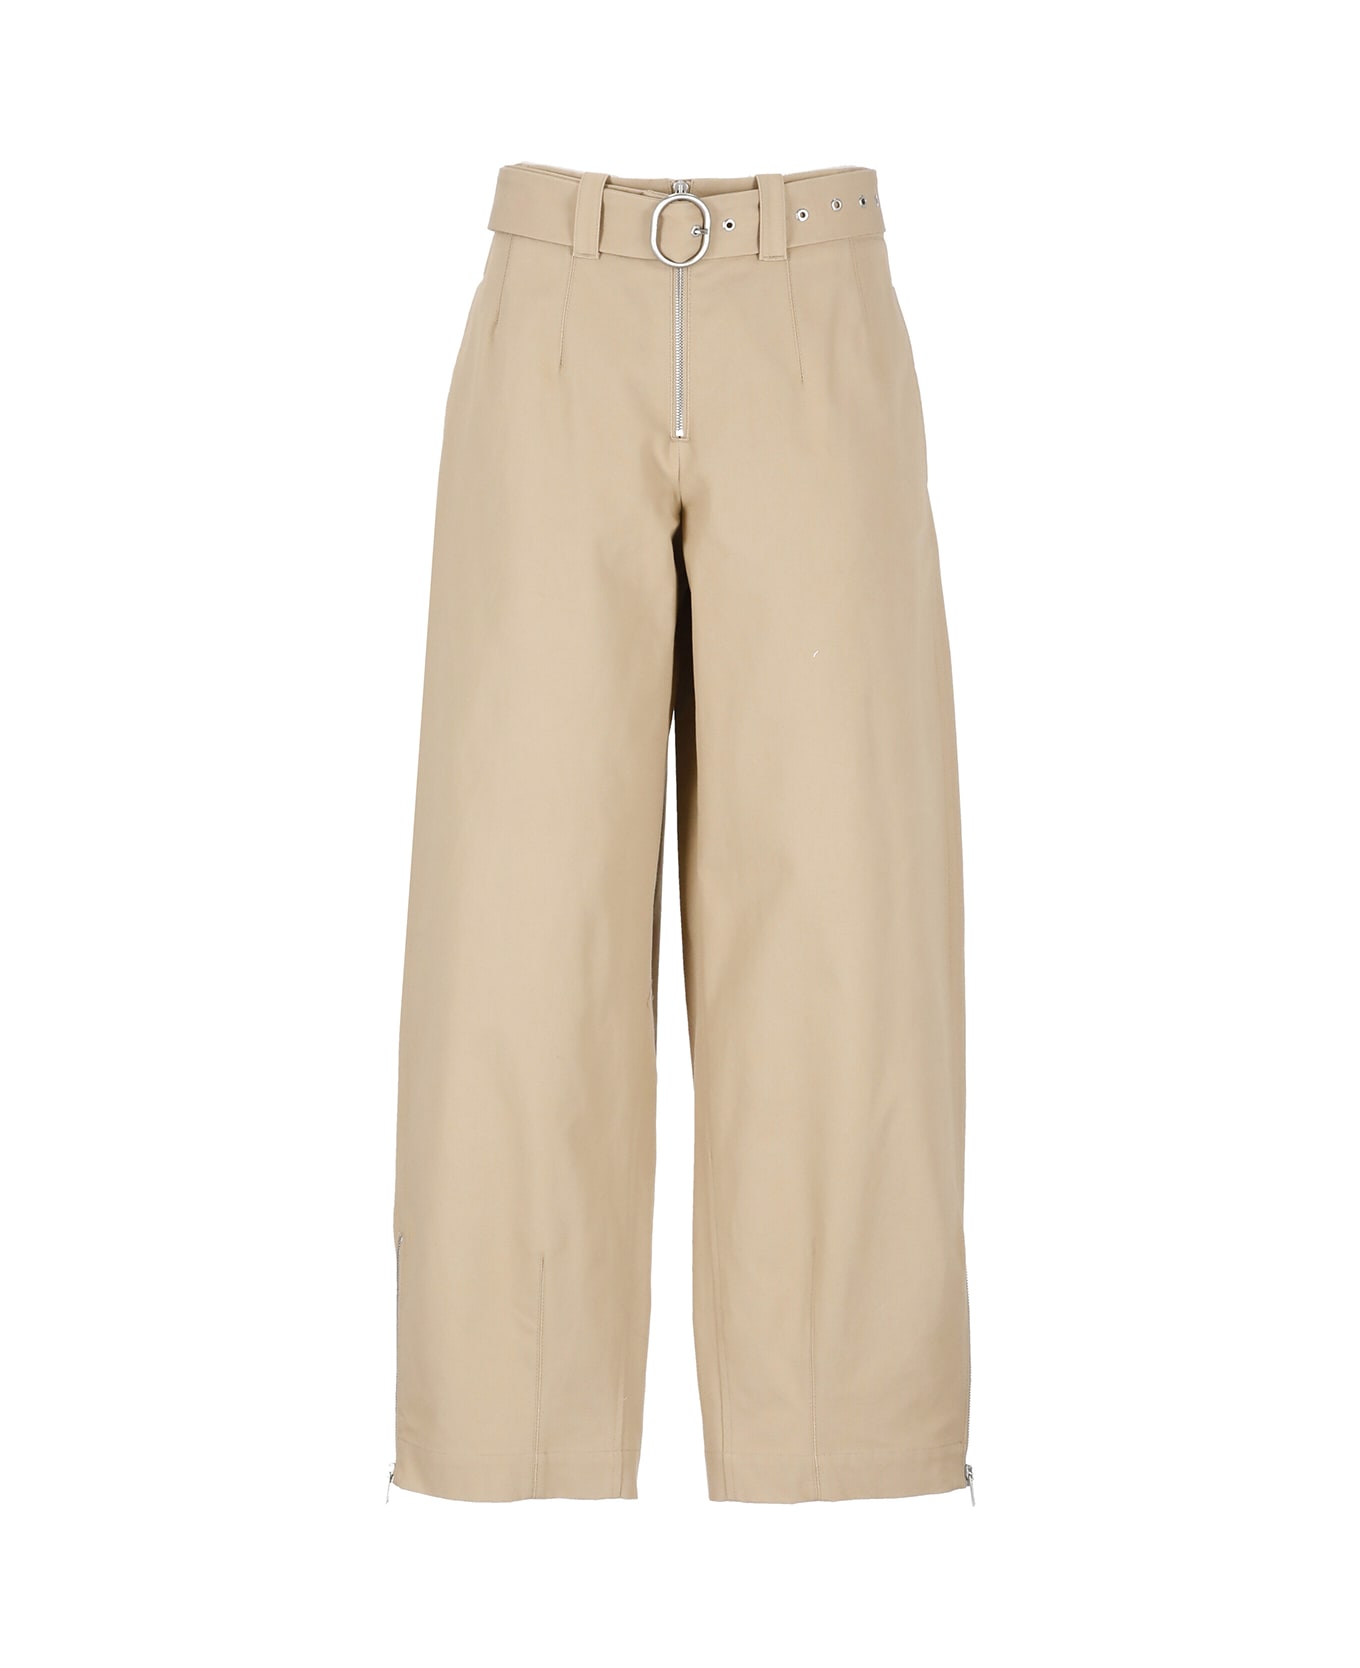 Jil Sander Cotton Tailored Trousers - Beige ボトムス